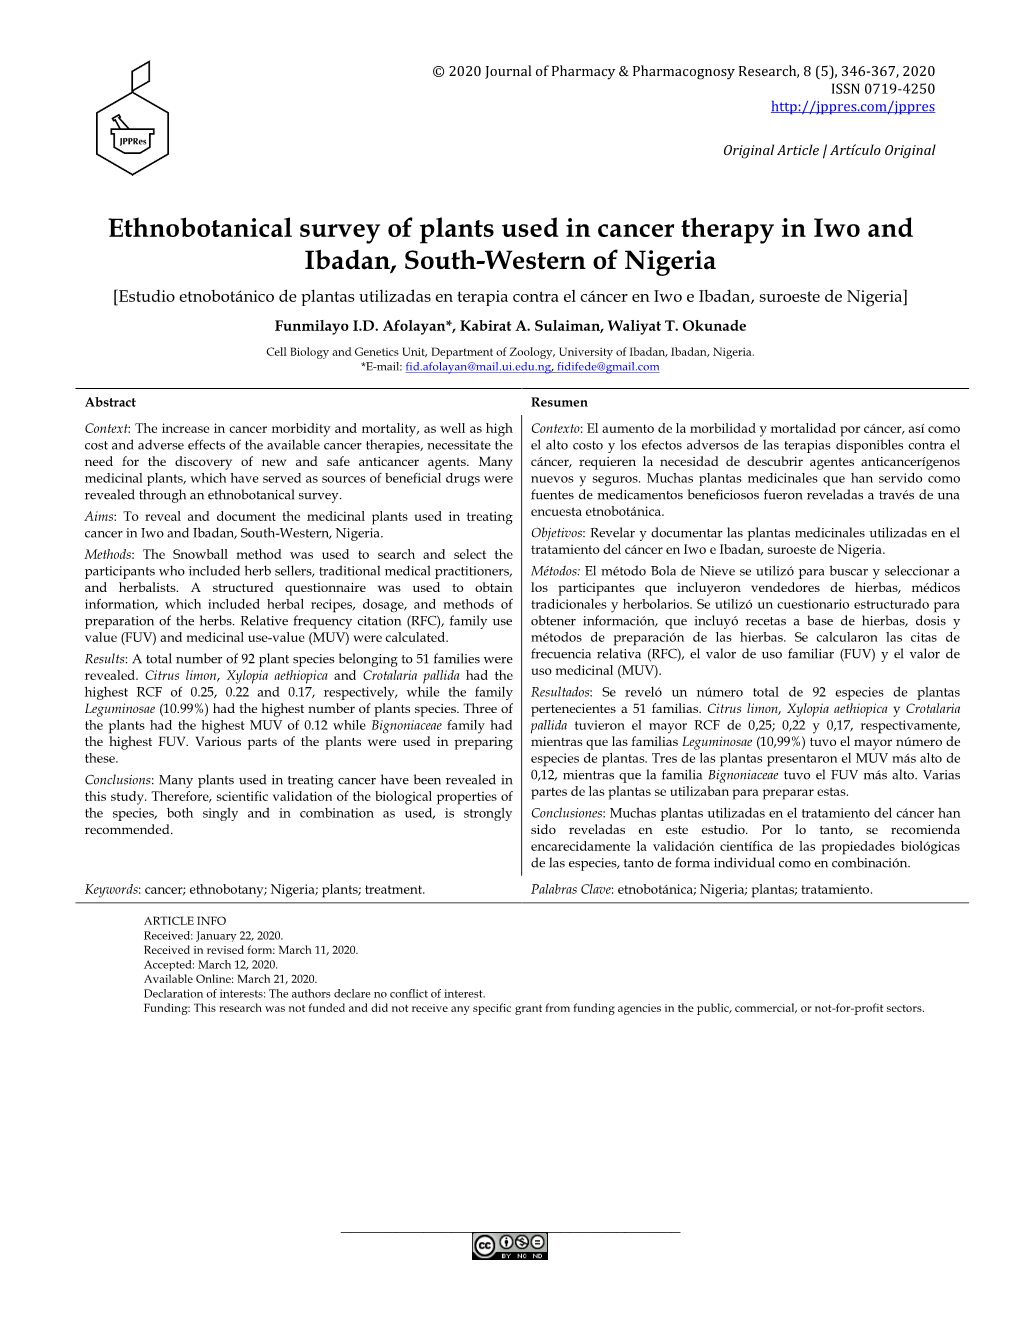 Ethnobotanical Survey of Plants Used in Cancer Therapy in Iwo And